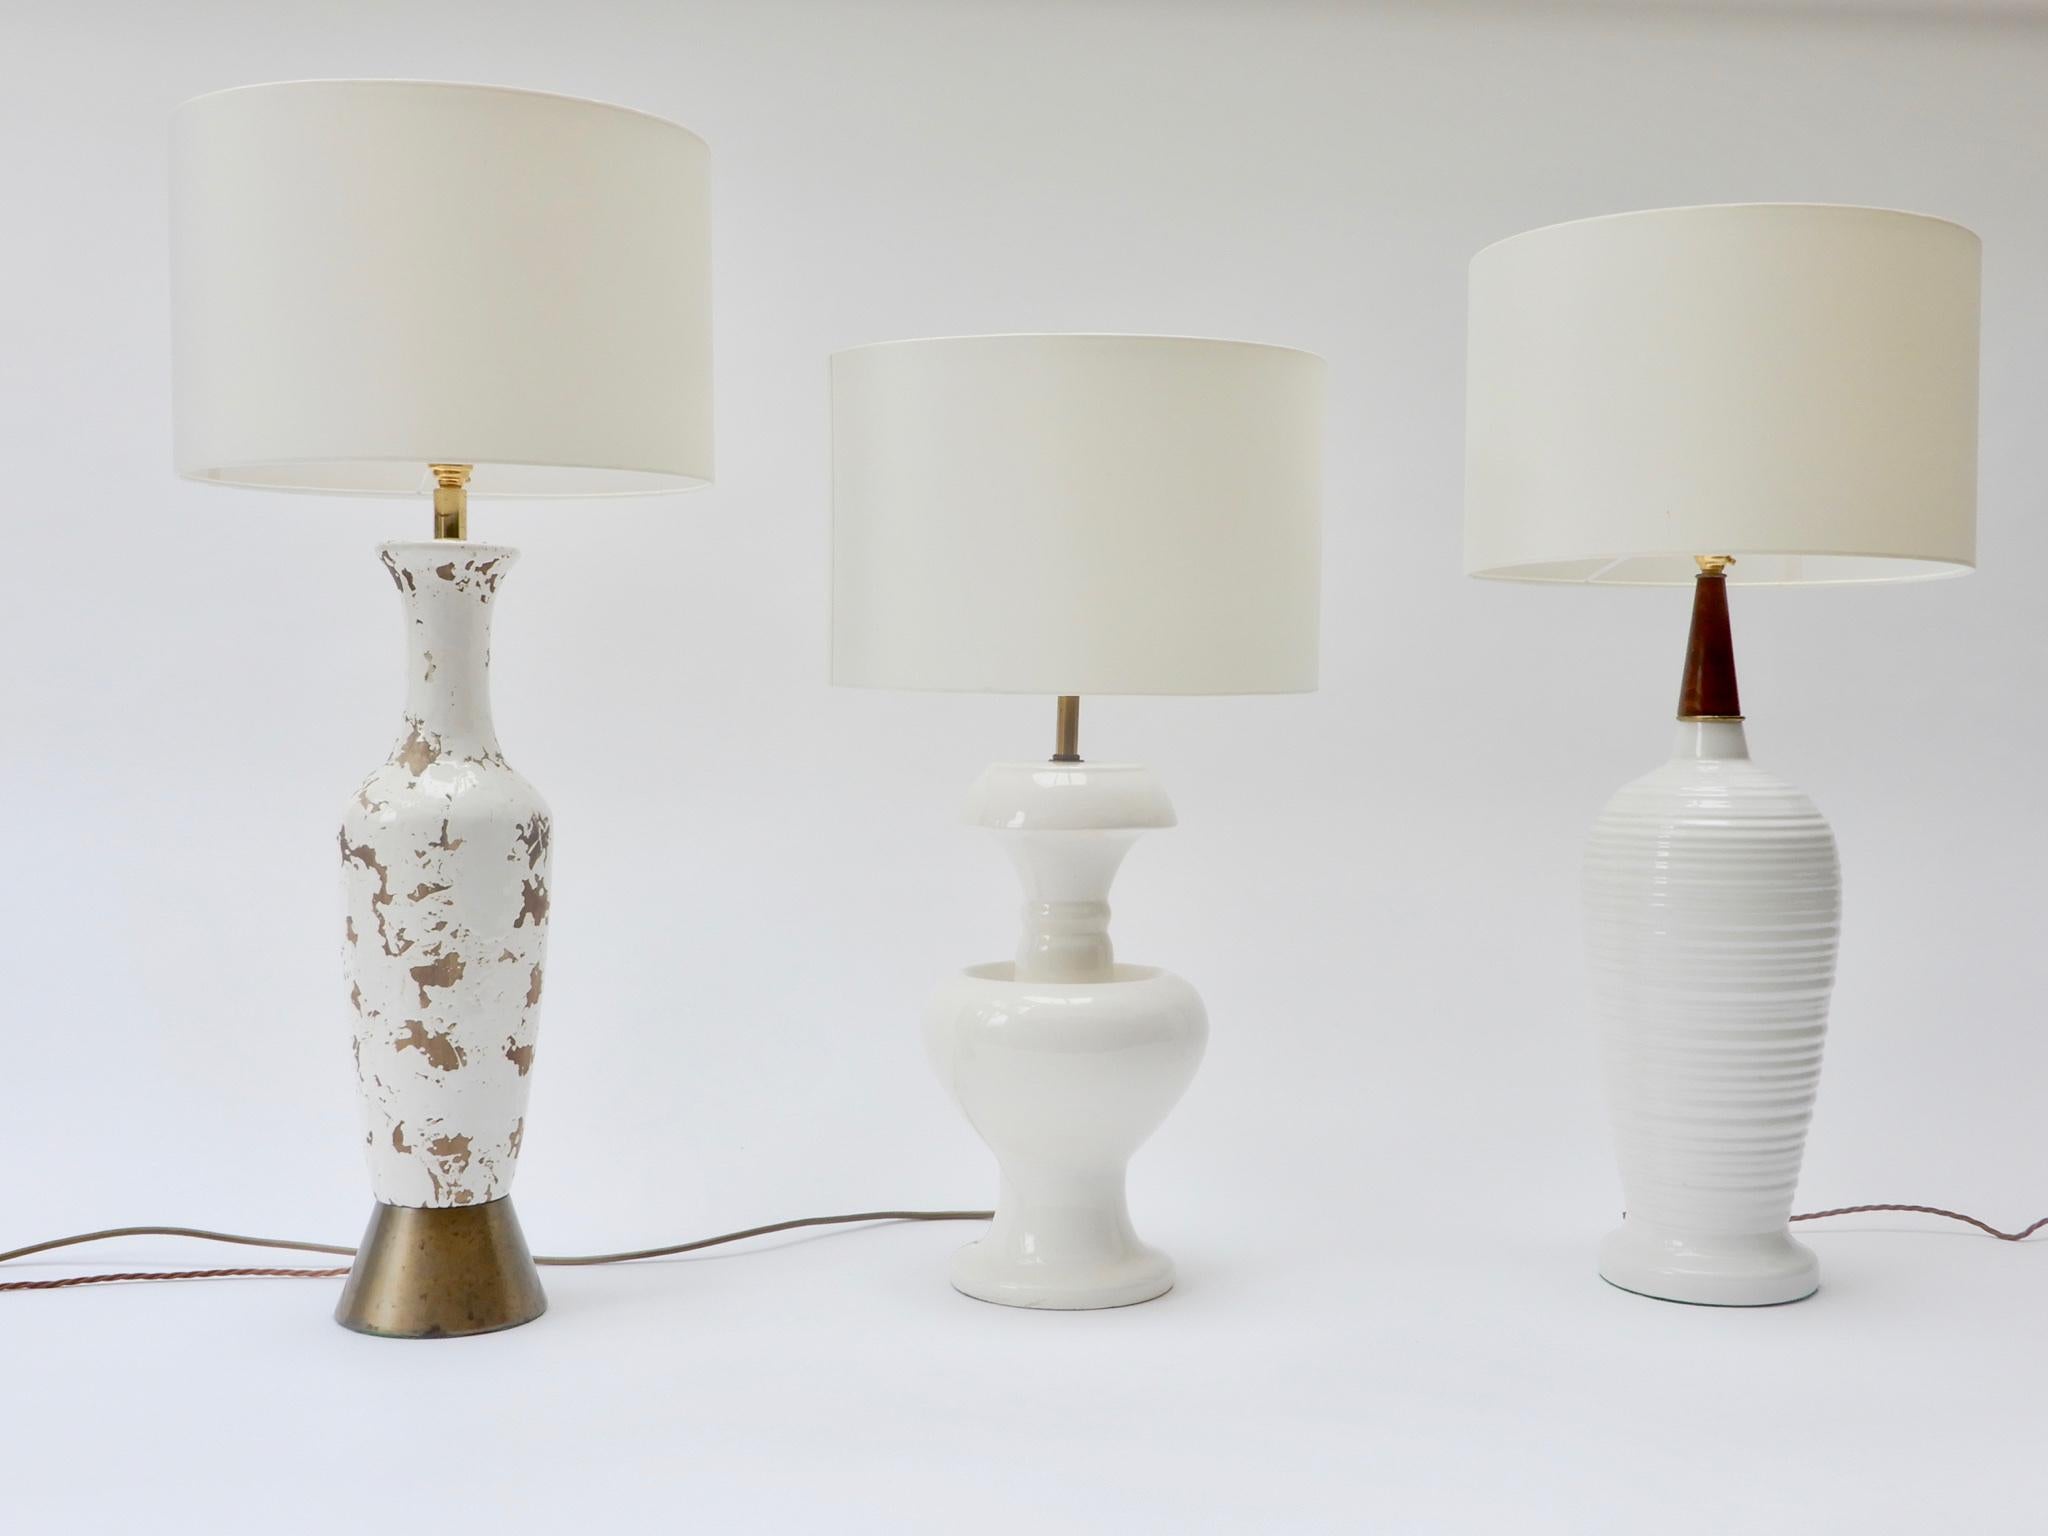 American white ceramic vintage table lamps.
UK electrical wiring.
 